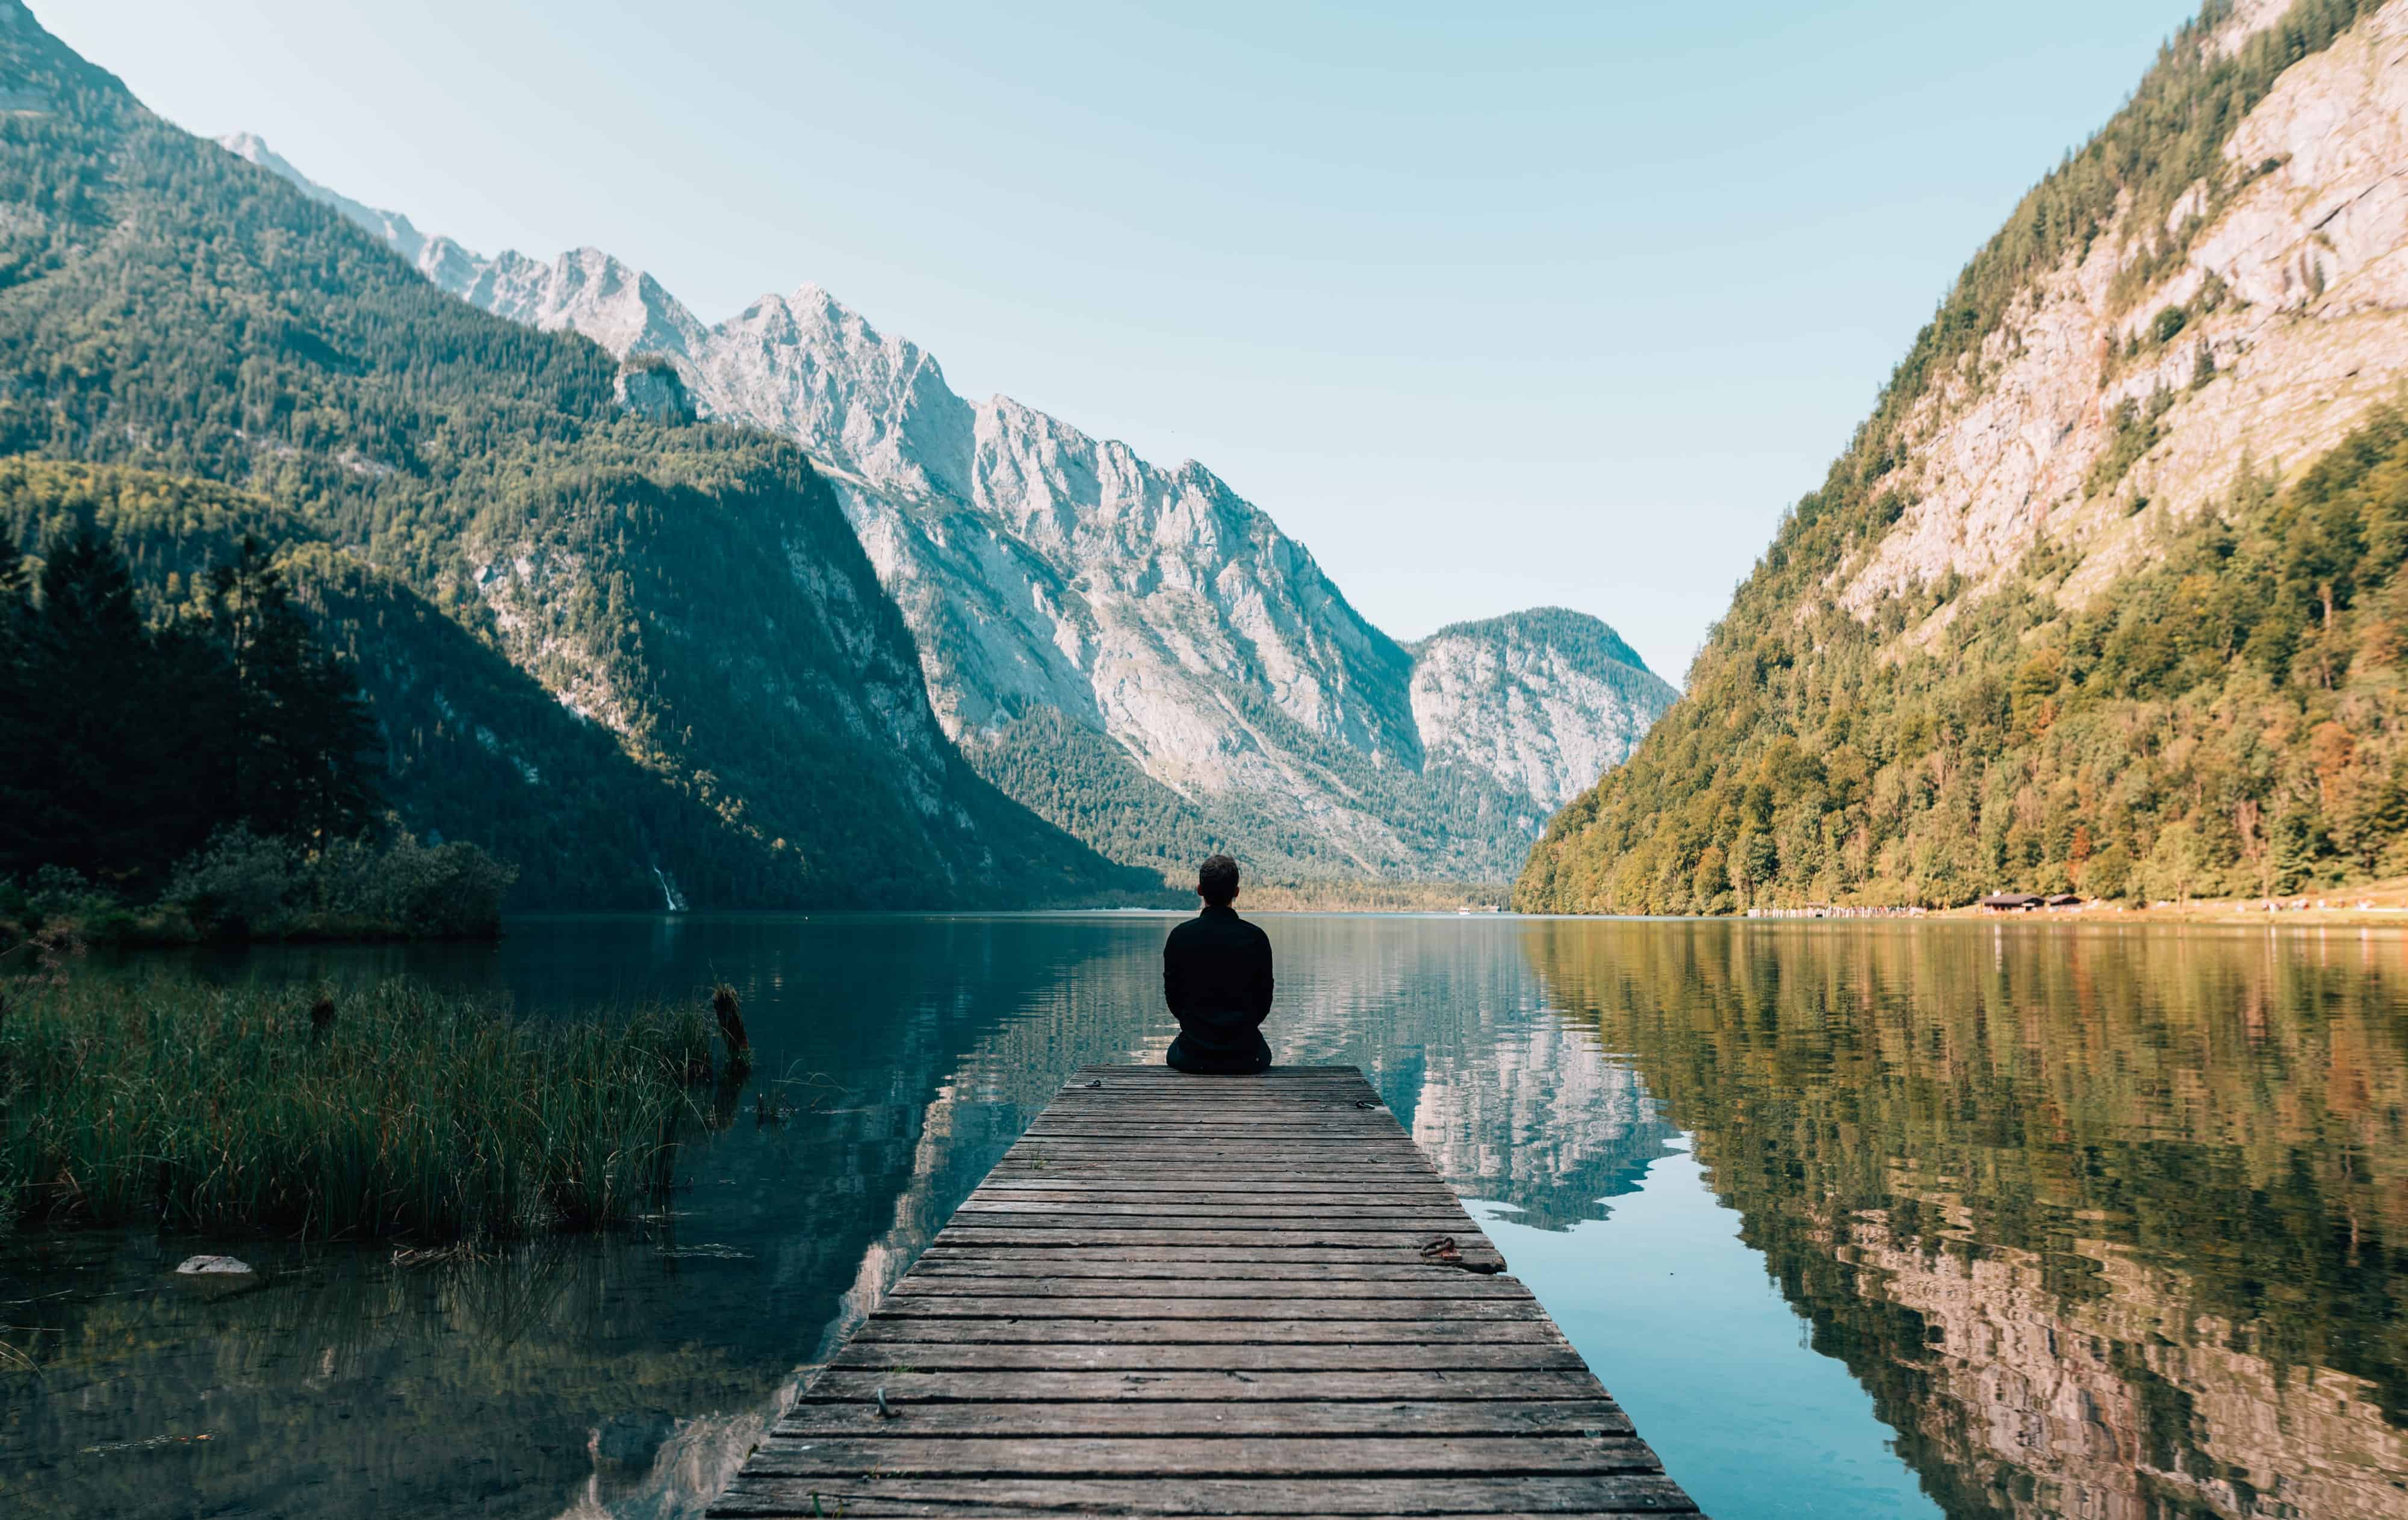 Learn 3 Important Benefits of Meditation That Will Change Your Life